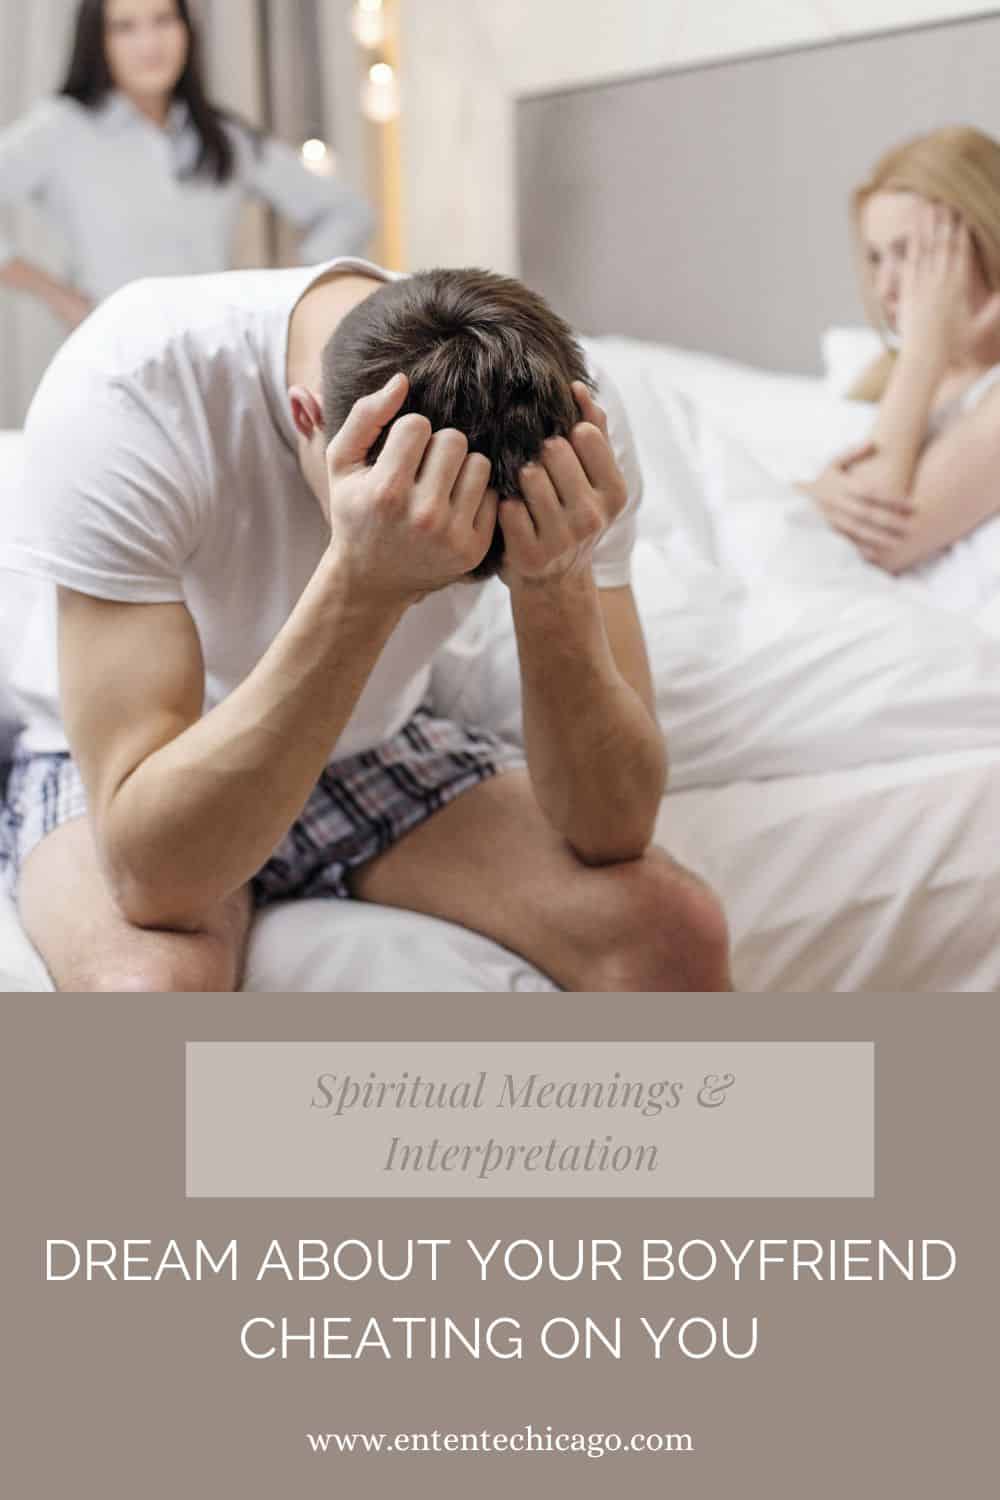 Dream About Your Boyfriend Cheating On You (Spiritual Meanings & Interpretation)